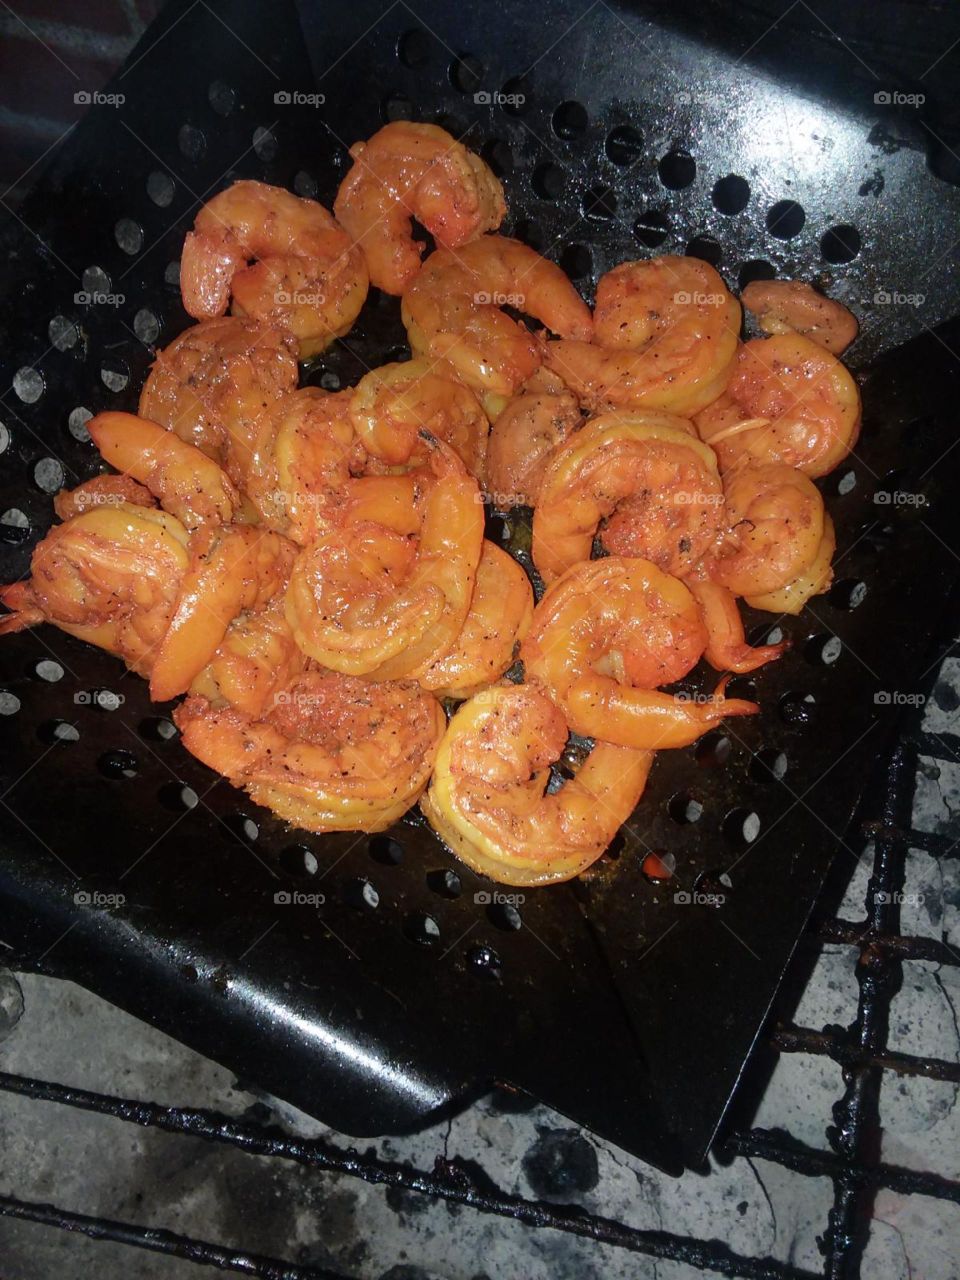 Shrimp on The Grill